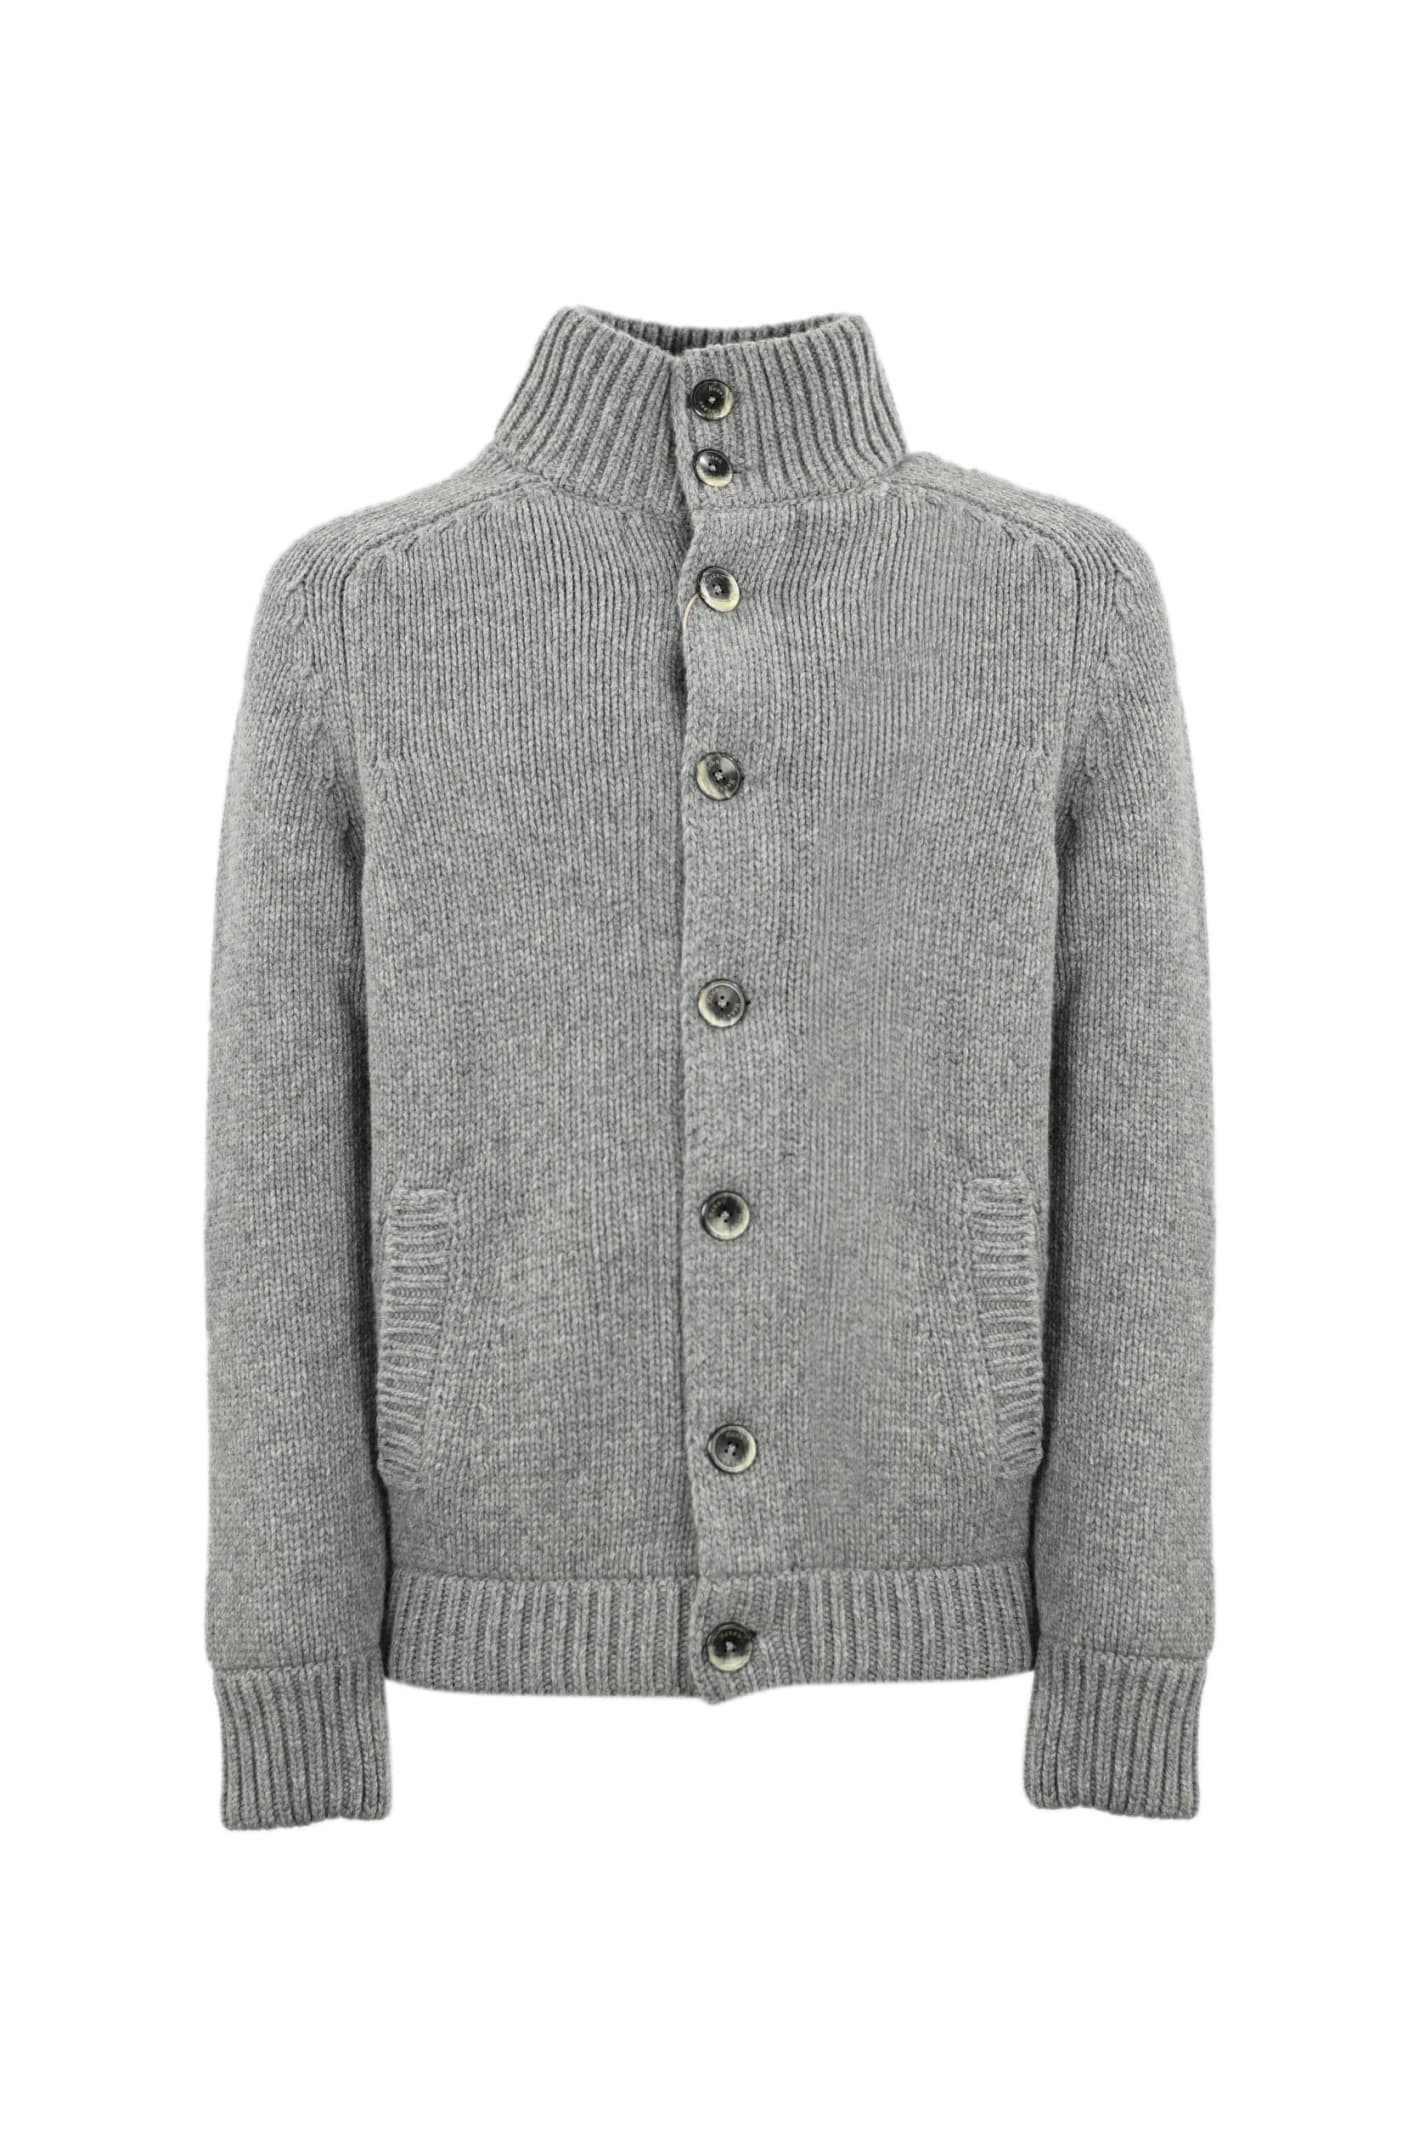 Herno Knitted Jacket